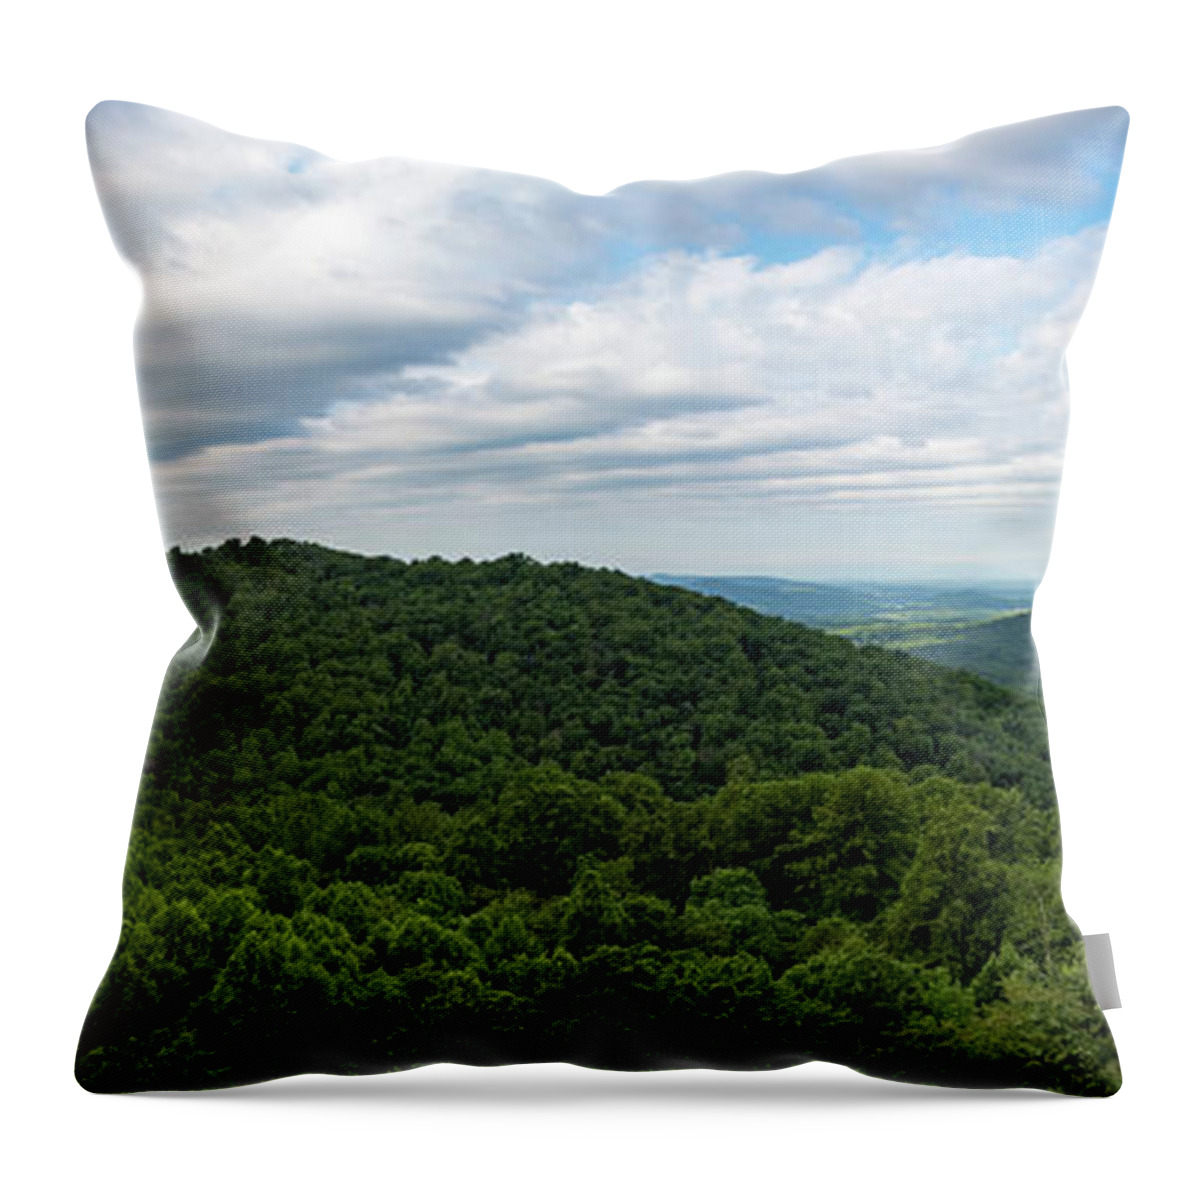 Appalachian Trail Throw Pillow featuring the photograph Raven Rocks Overlook Panorama by Natural Vista Photo